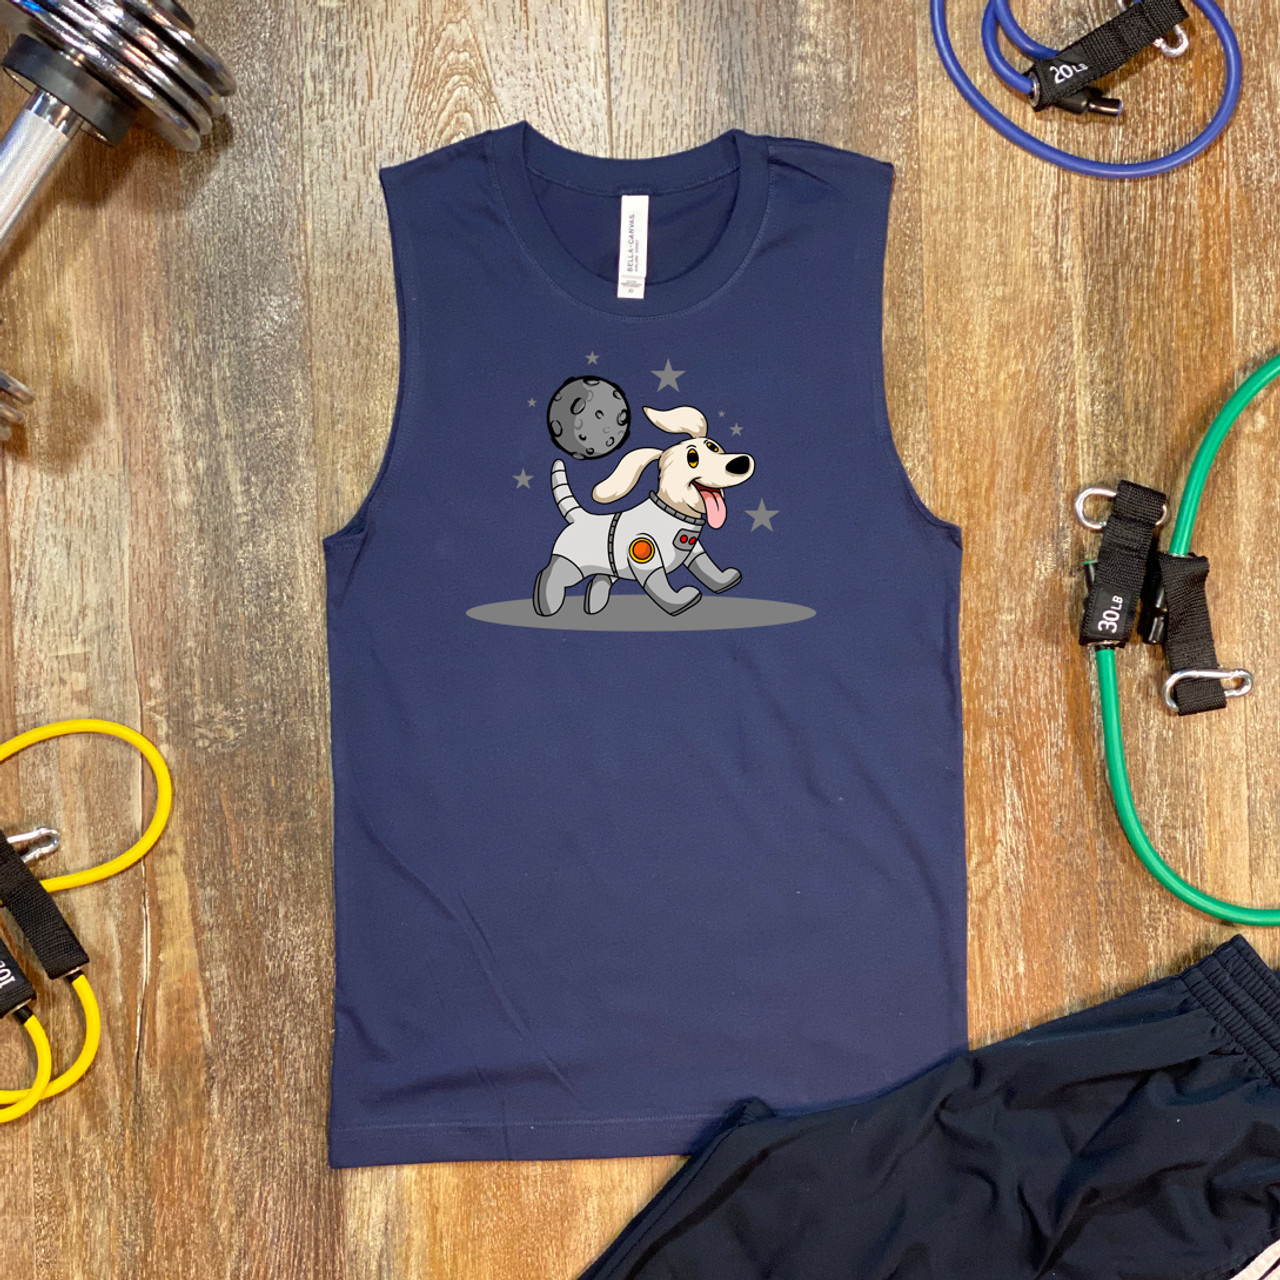 Navy Astro Rover Unisex Muscle Shirt - Bella + Canvas 3483